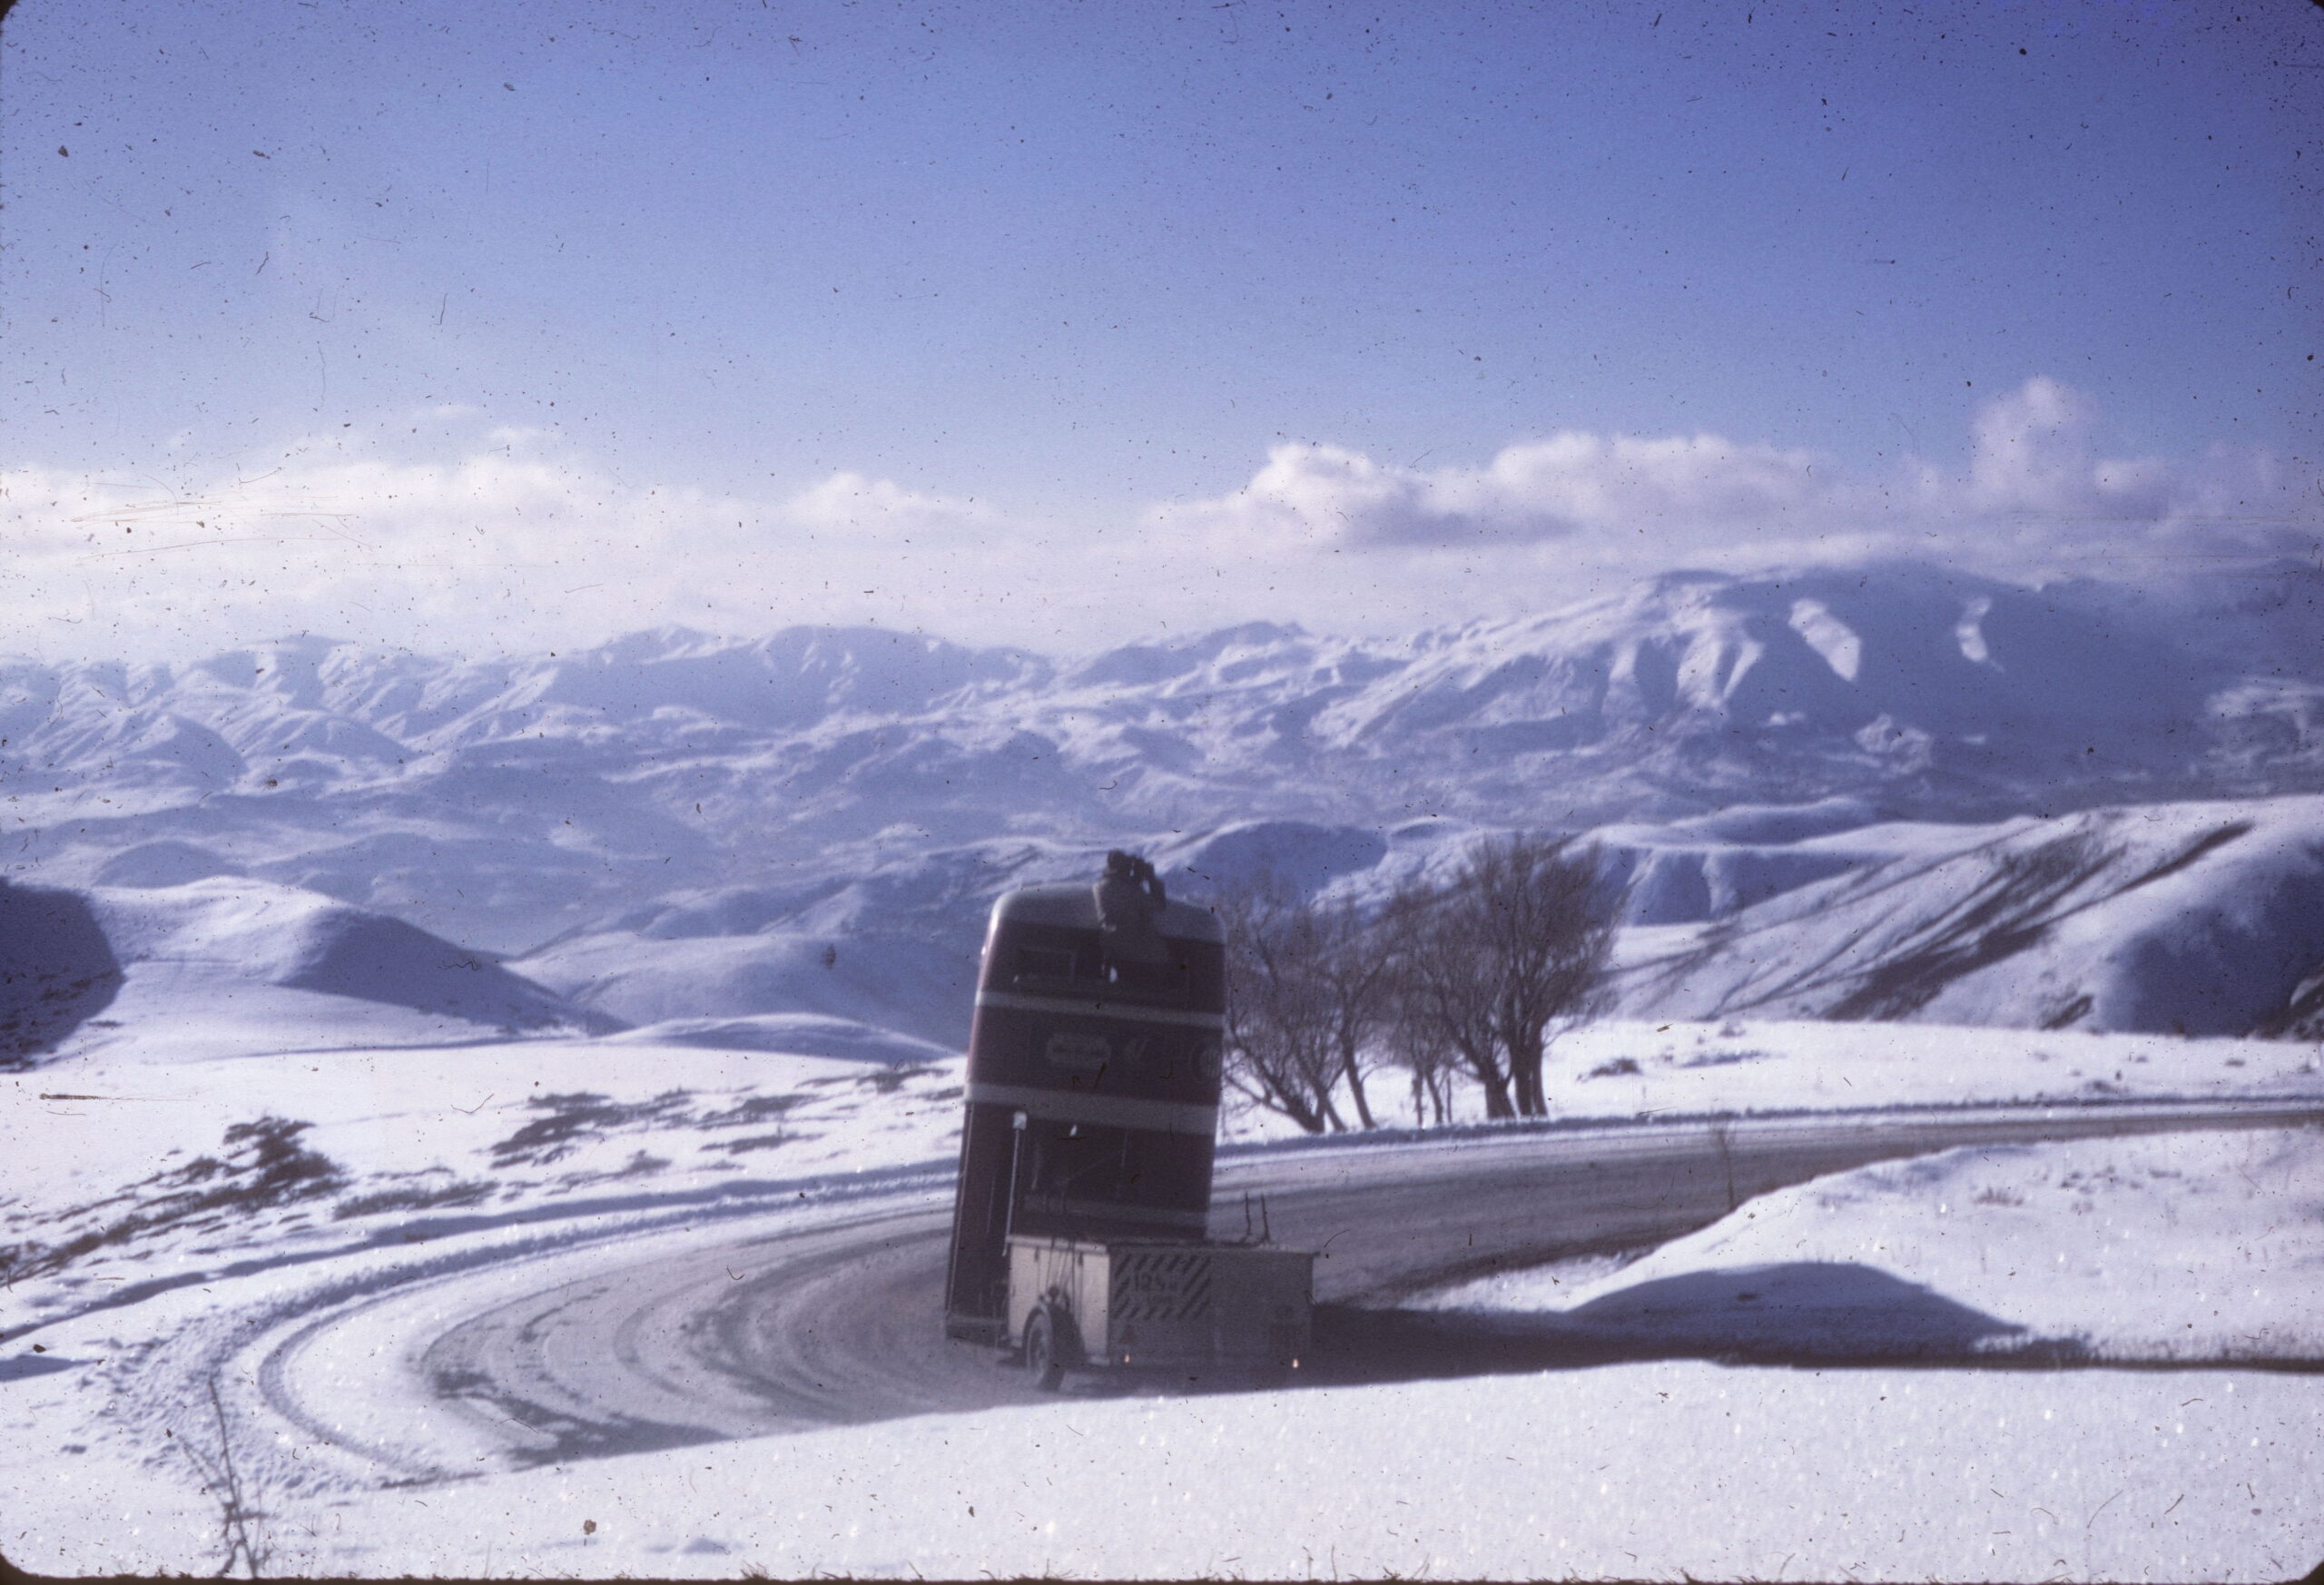 071 – Bus on top of snowy Turkish mts. Dec.69